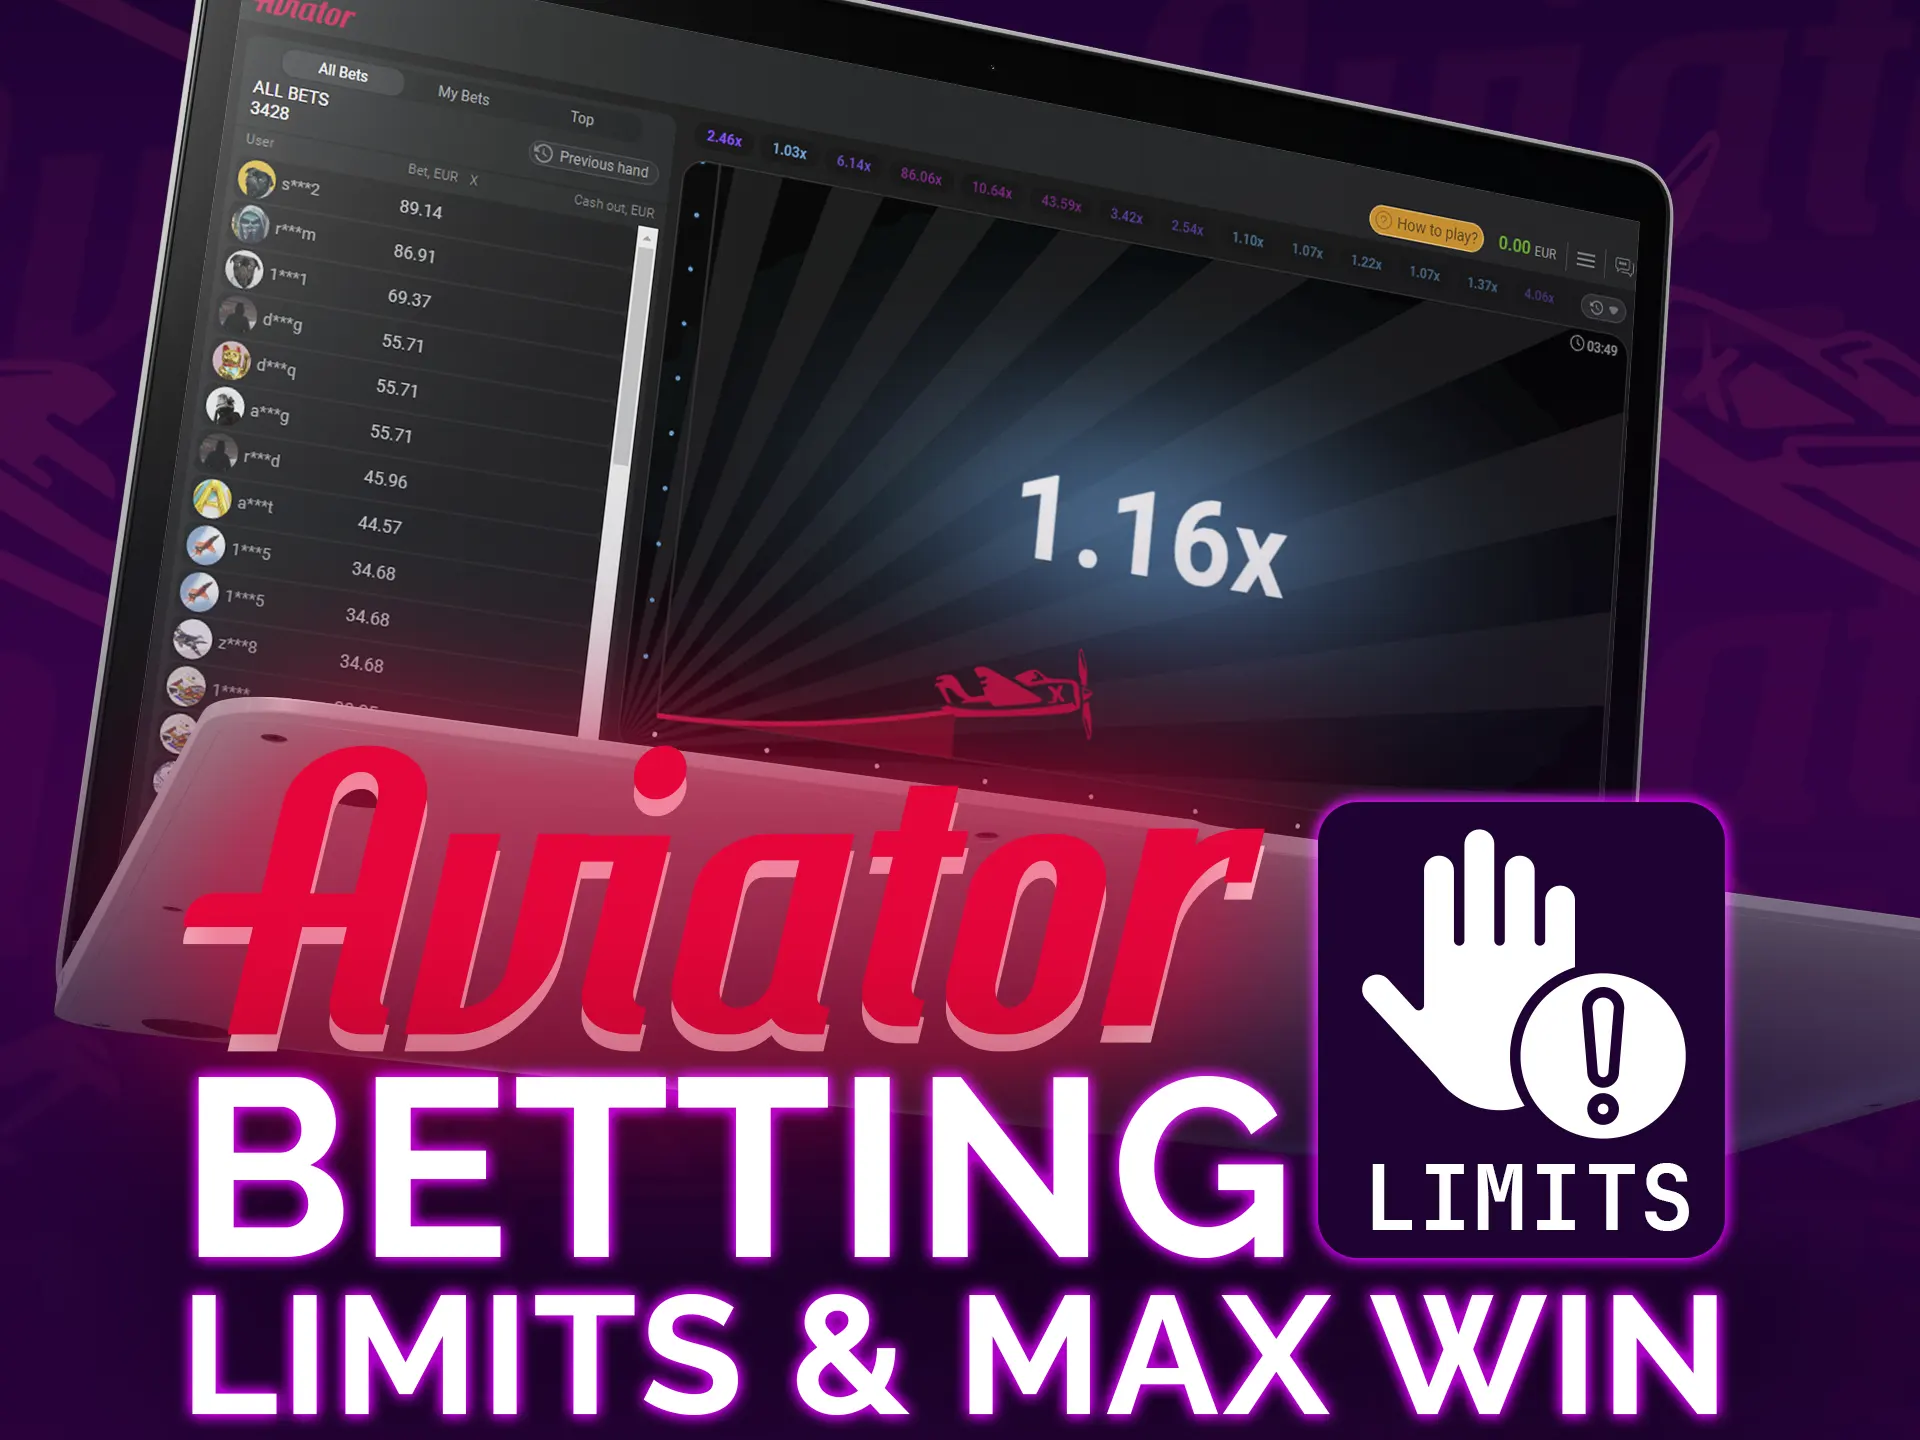 Aviator offers flexible betting and unlimited maximum win.